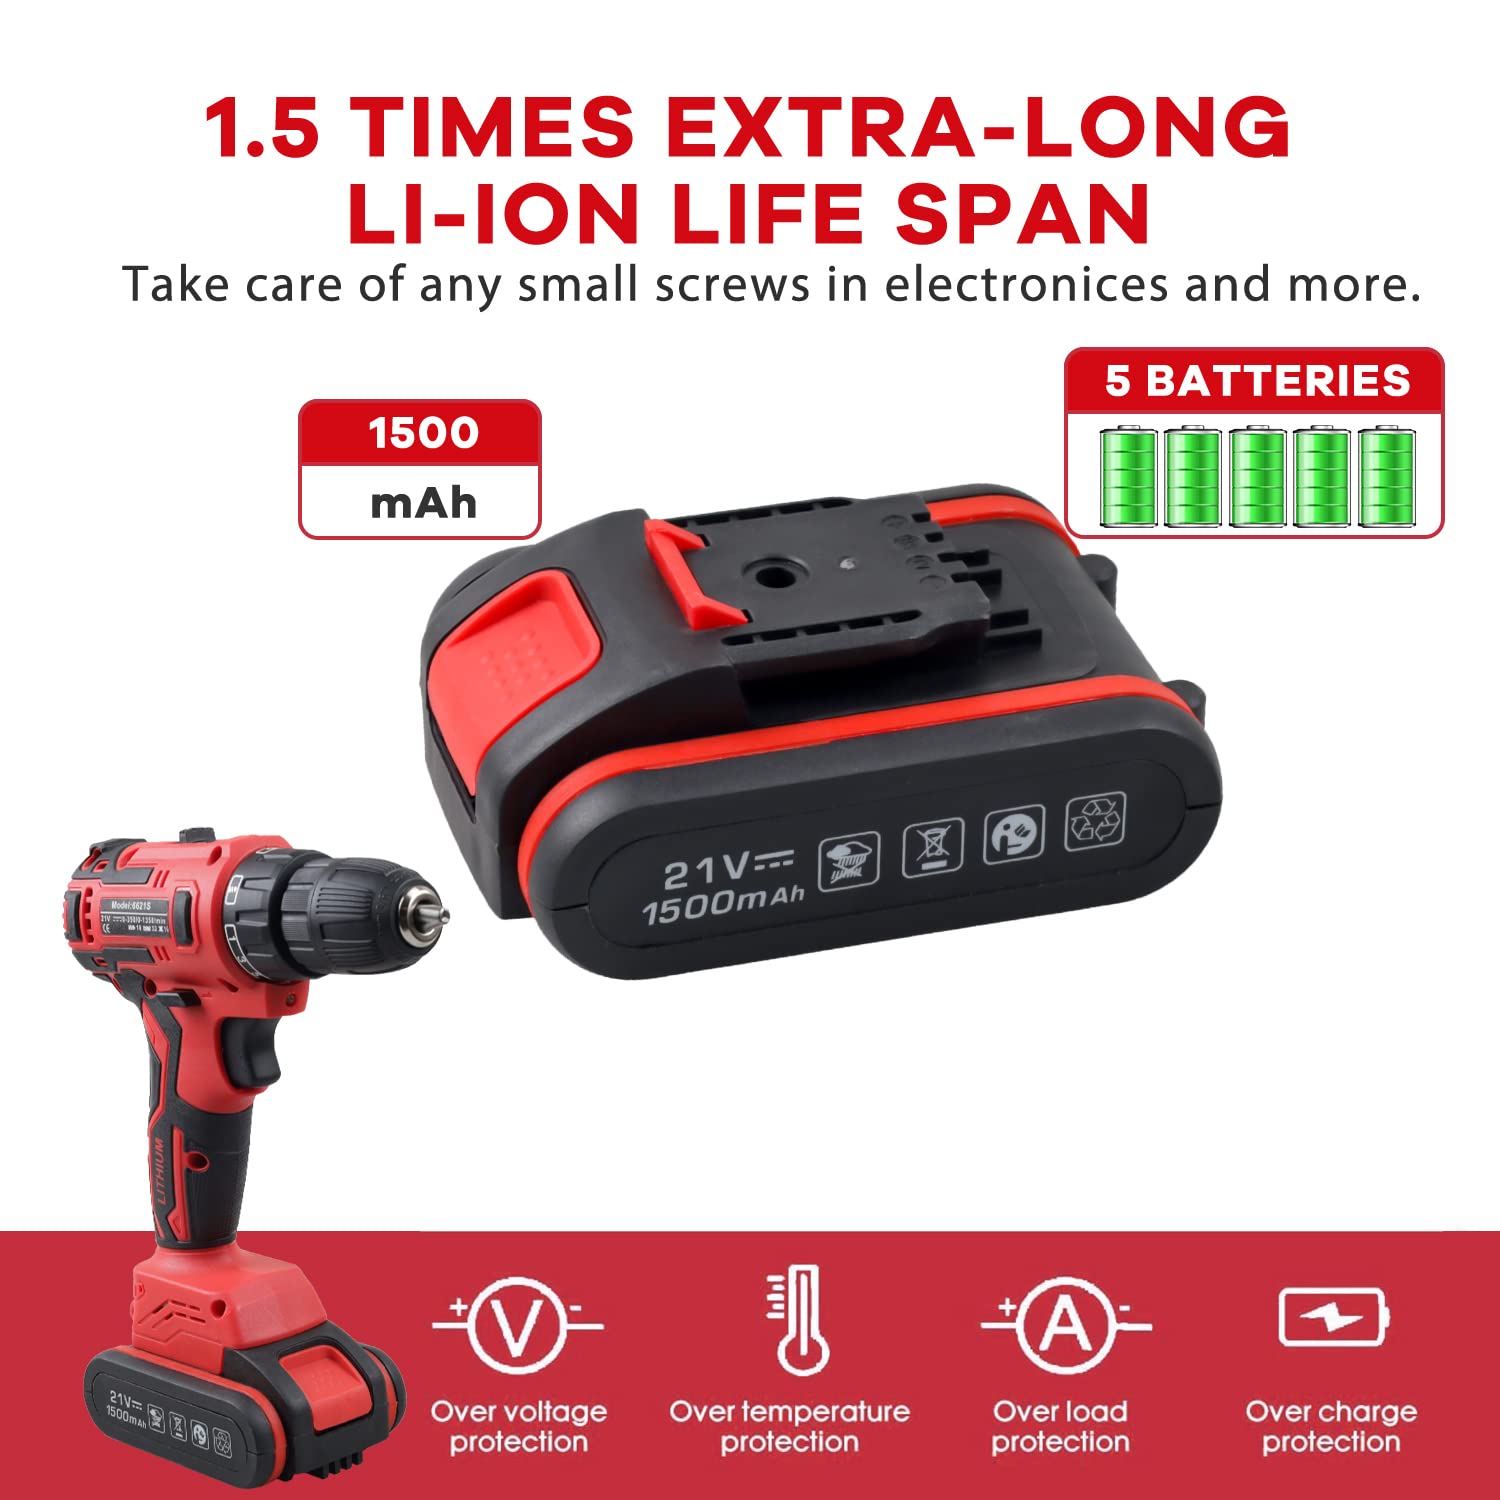 jar-owl 21V Powerful Brushless Motor, 319 In-lb Torque, 0-1350RMP Variable Speed, 10MM 3/8'' Keyless Chuck, 25+1 Clutch, 1.5Ah Li-Ion Battery & Charger for Home Tool Kit